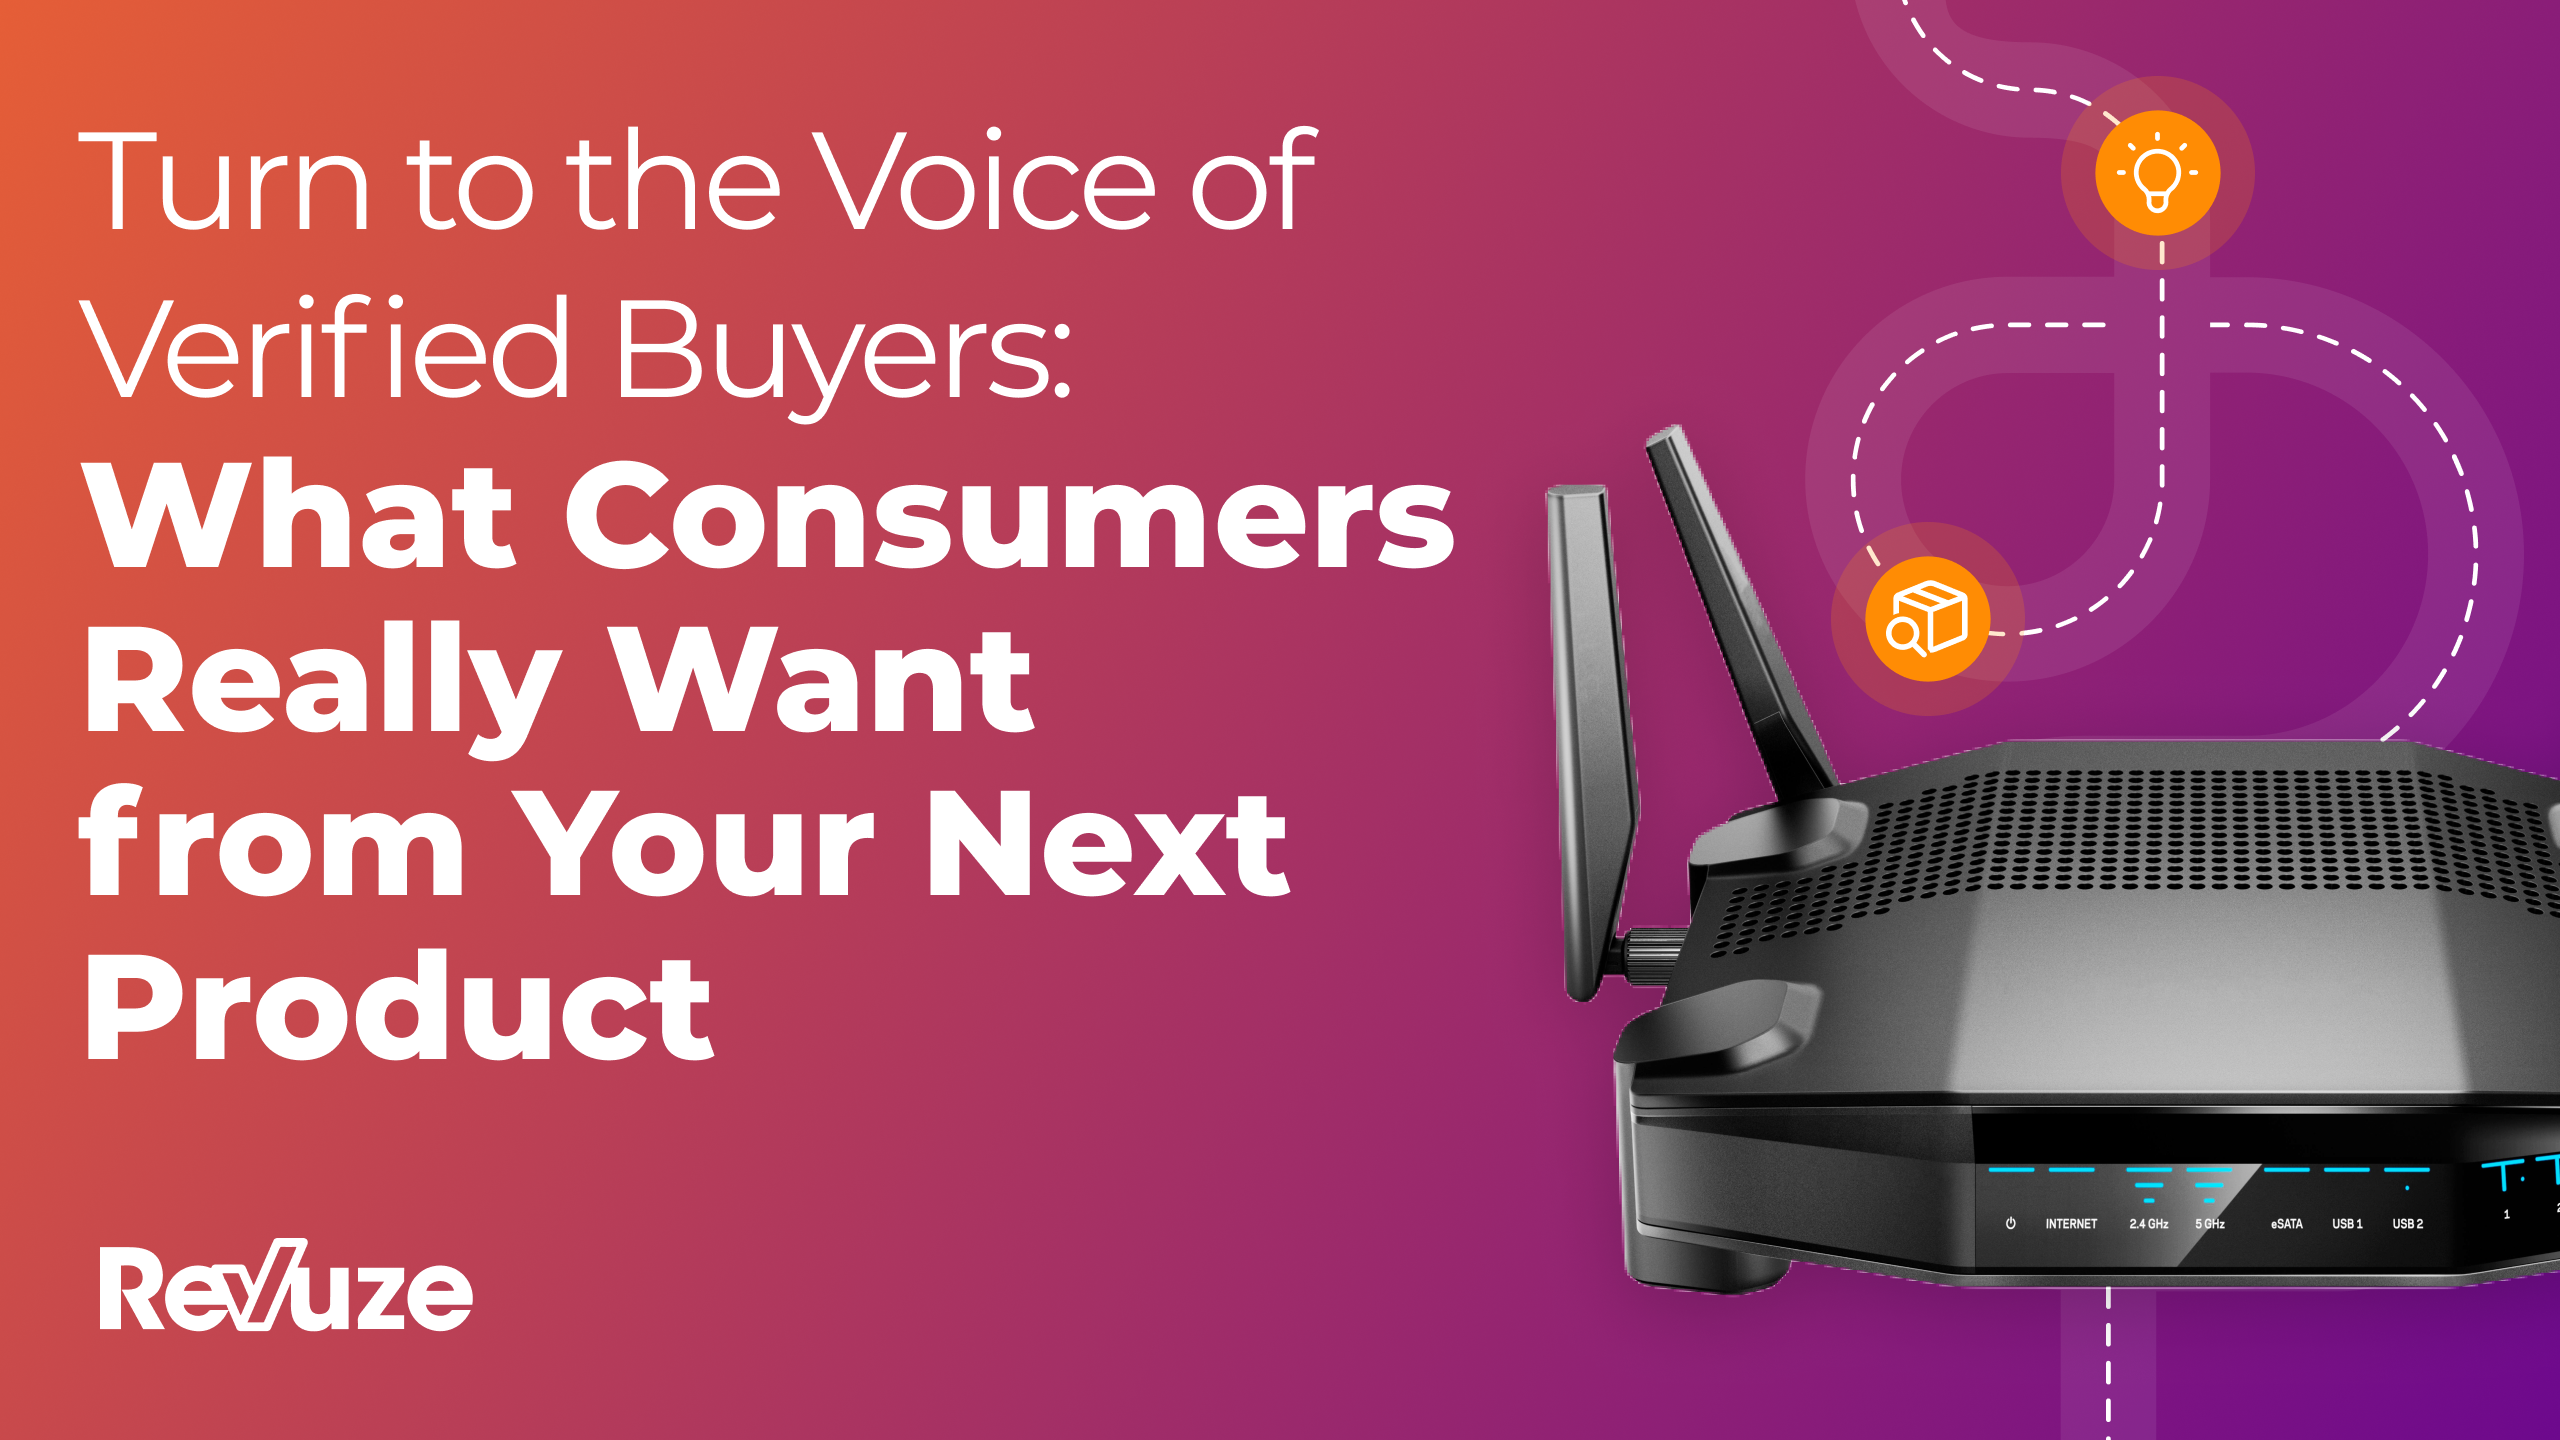 Turn to the Voice of Verified Buyers: What Consumers Really Want from Your Next Product